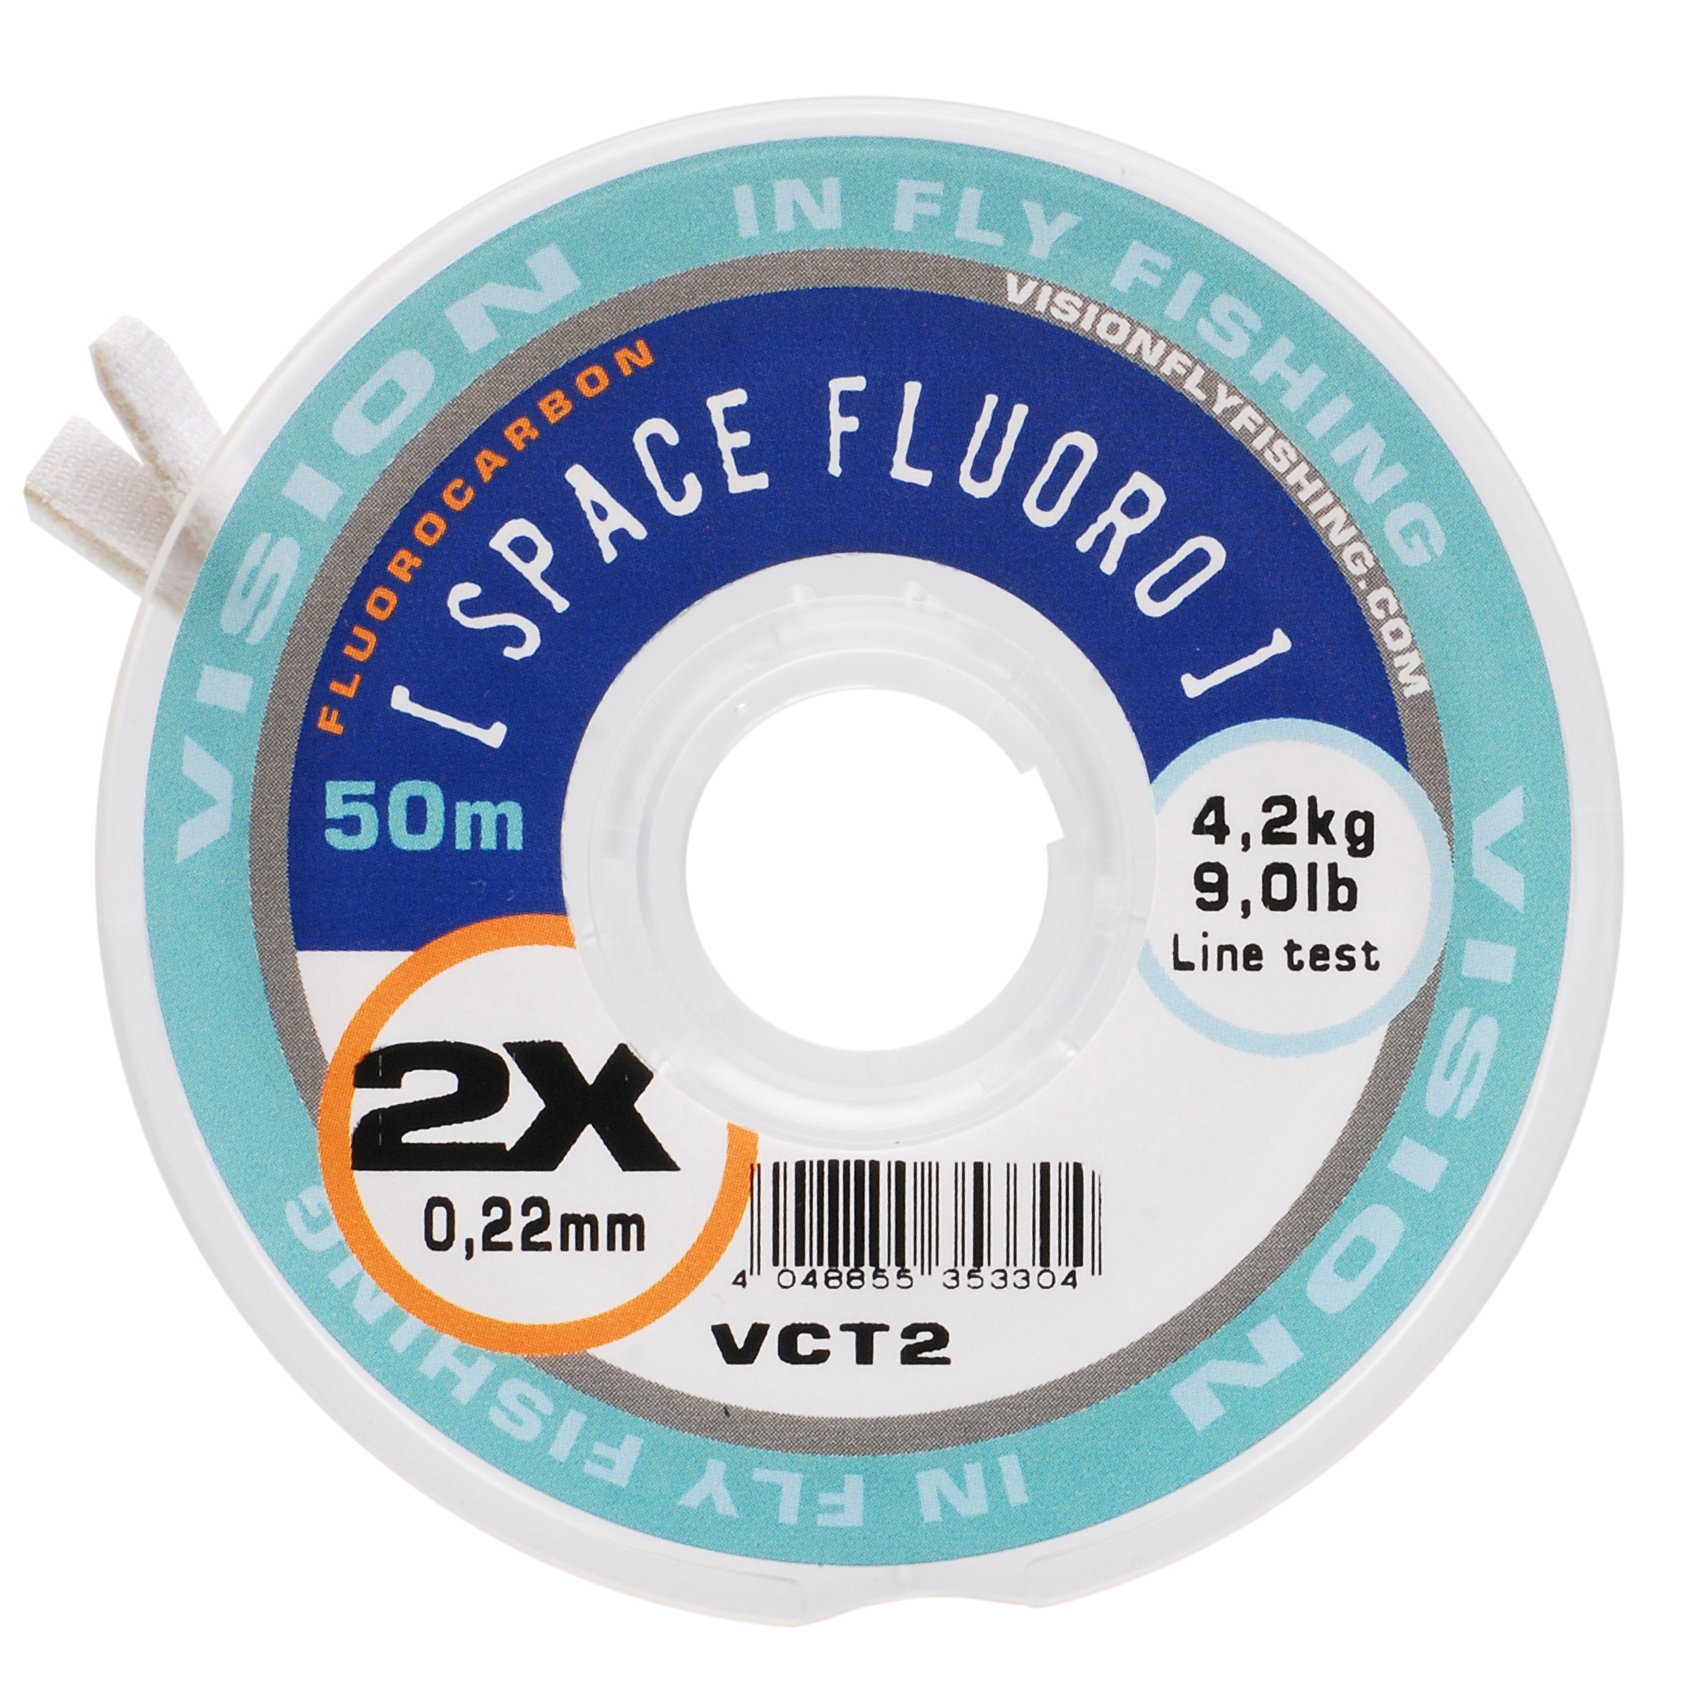 VISION SPACEFLUORO TIPPETS-2X